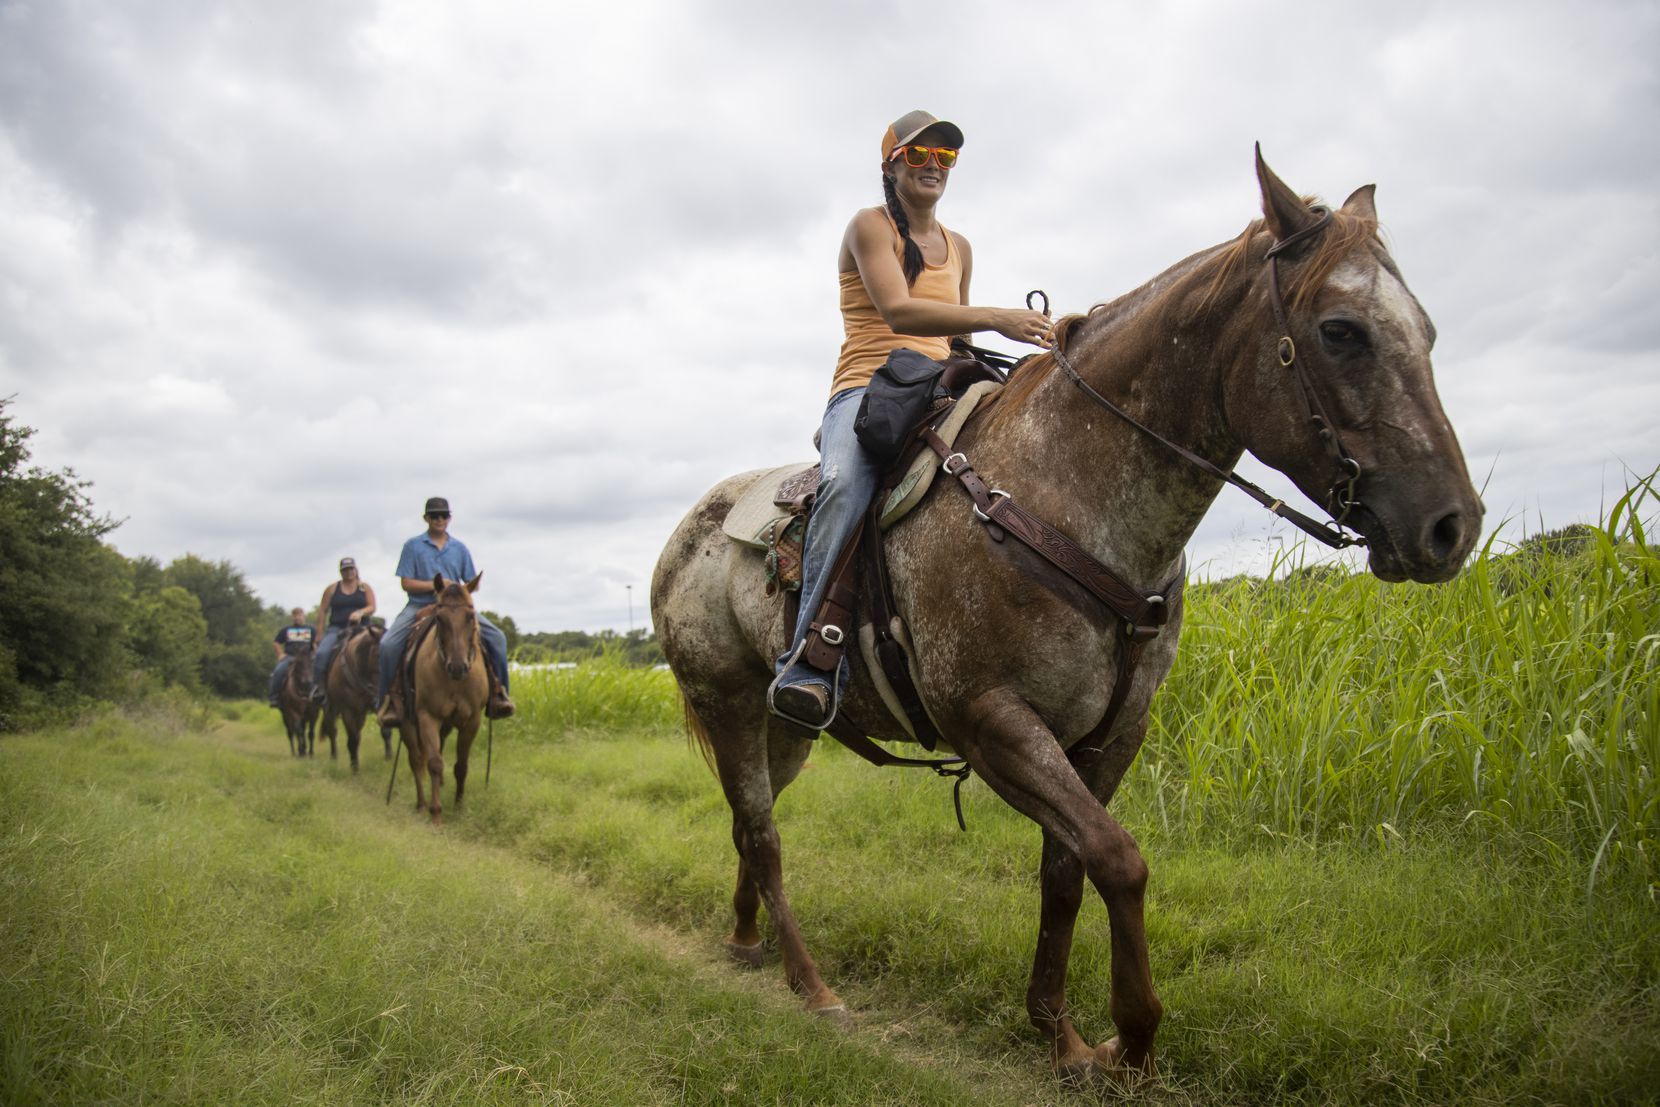 Riders celebrate a friend's birthday by having a ride through the equestrian trail at Ray Roberts Lake State Park on July 25, 2020.